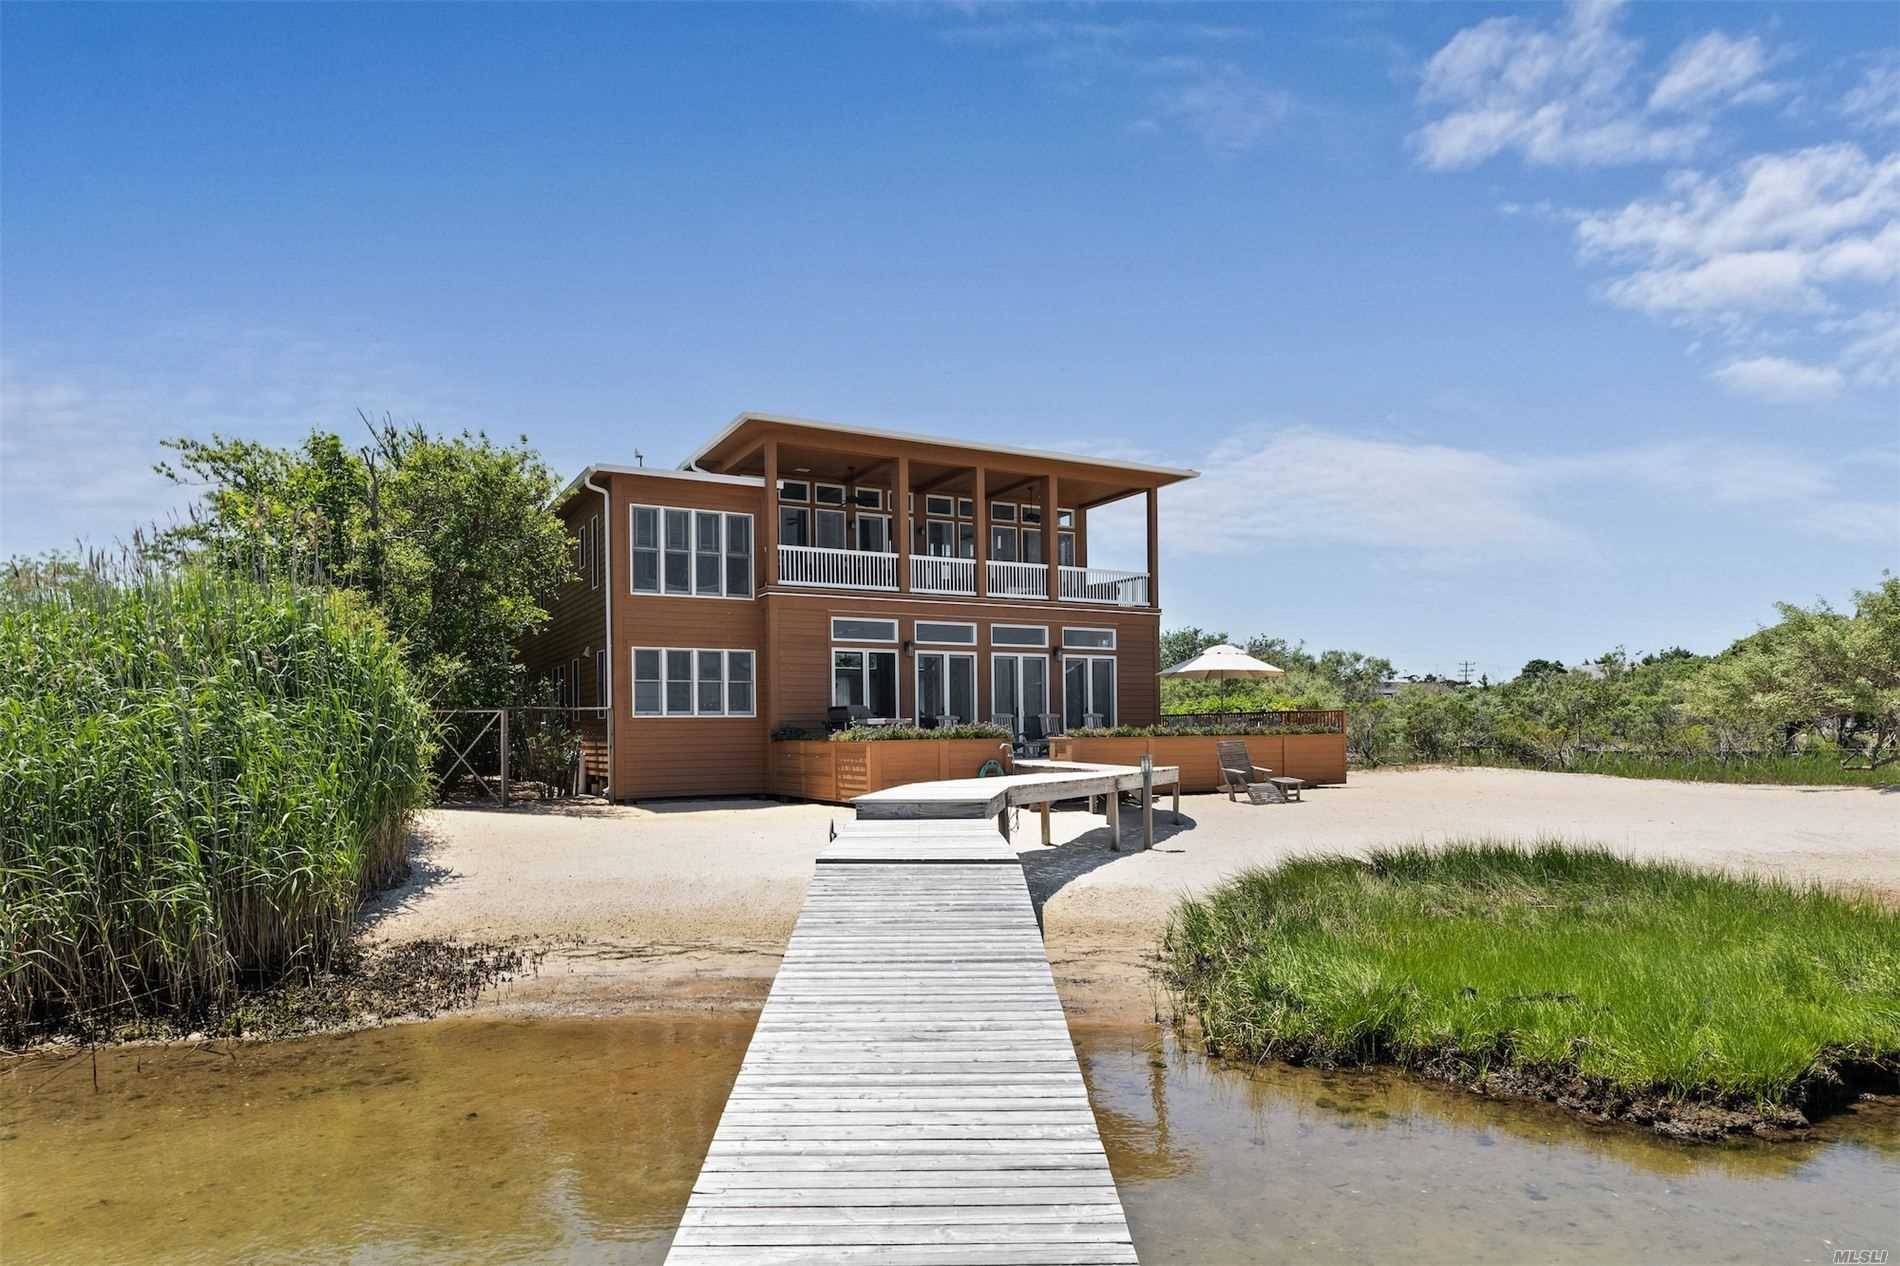 This spectacular Saltaire home, located on the waterfront of Clam Pond Cove, the protected jewel which is part of the Great South Bay, has everything the discerning buyer would want ...